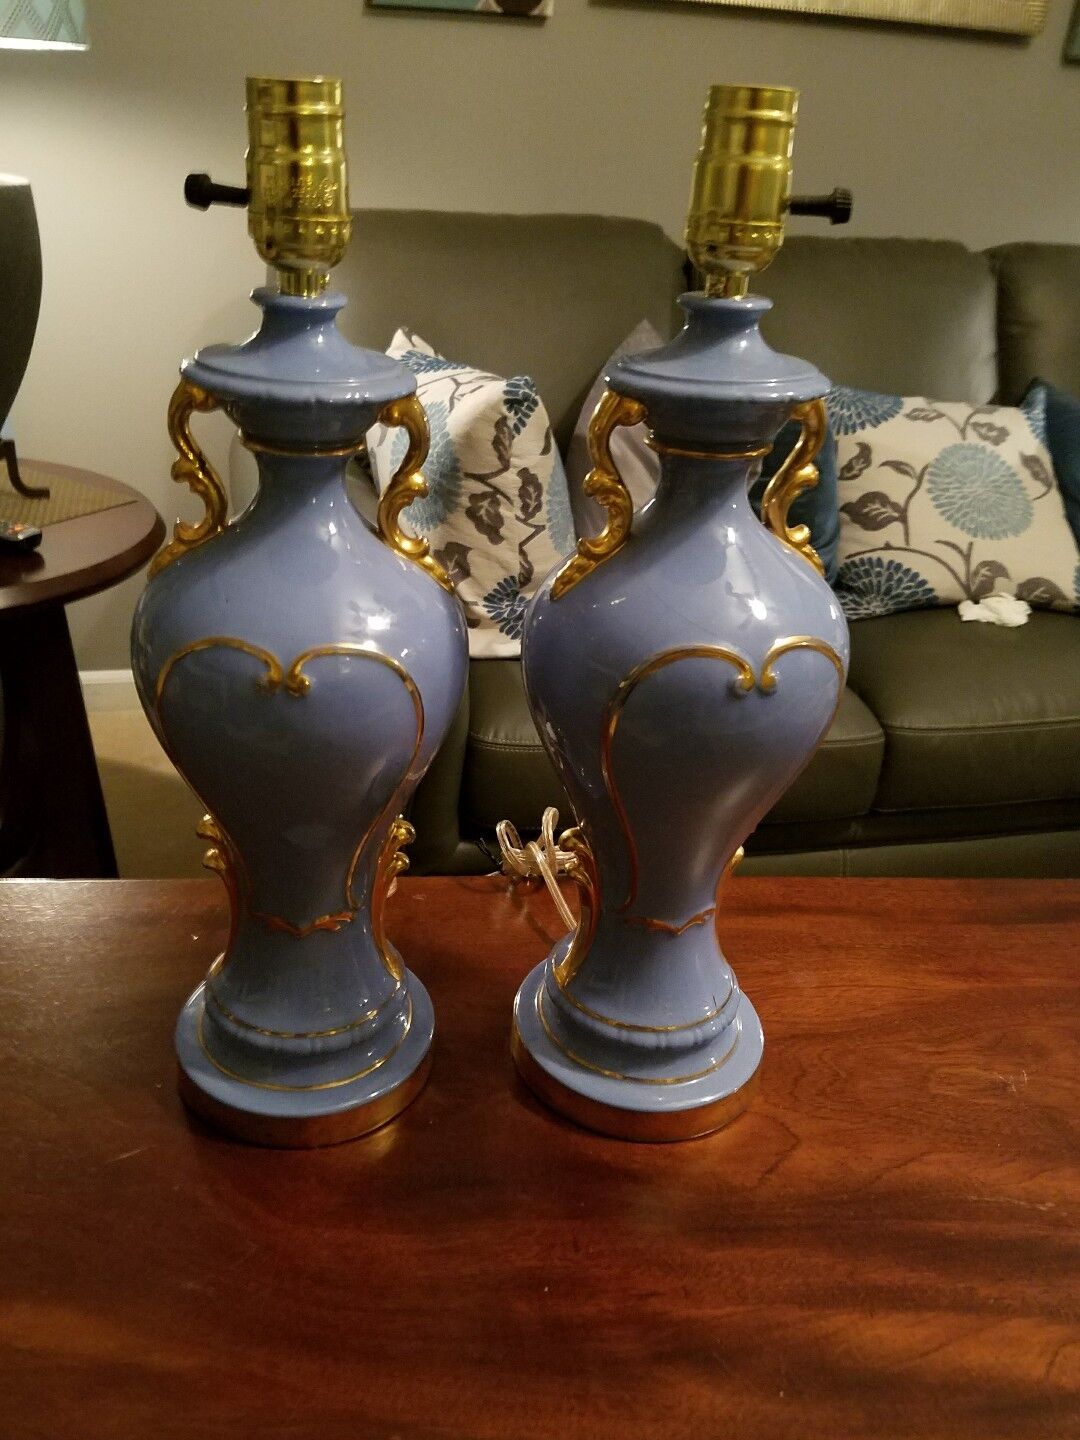 Antique Victorian French Urn Lamps in beautiful baby blue early 19th century HTF